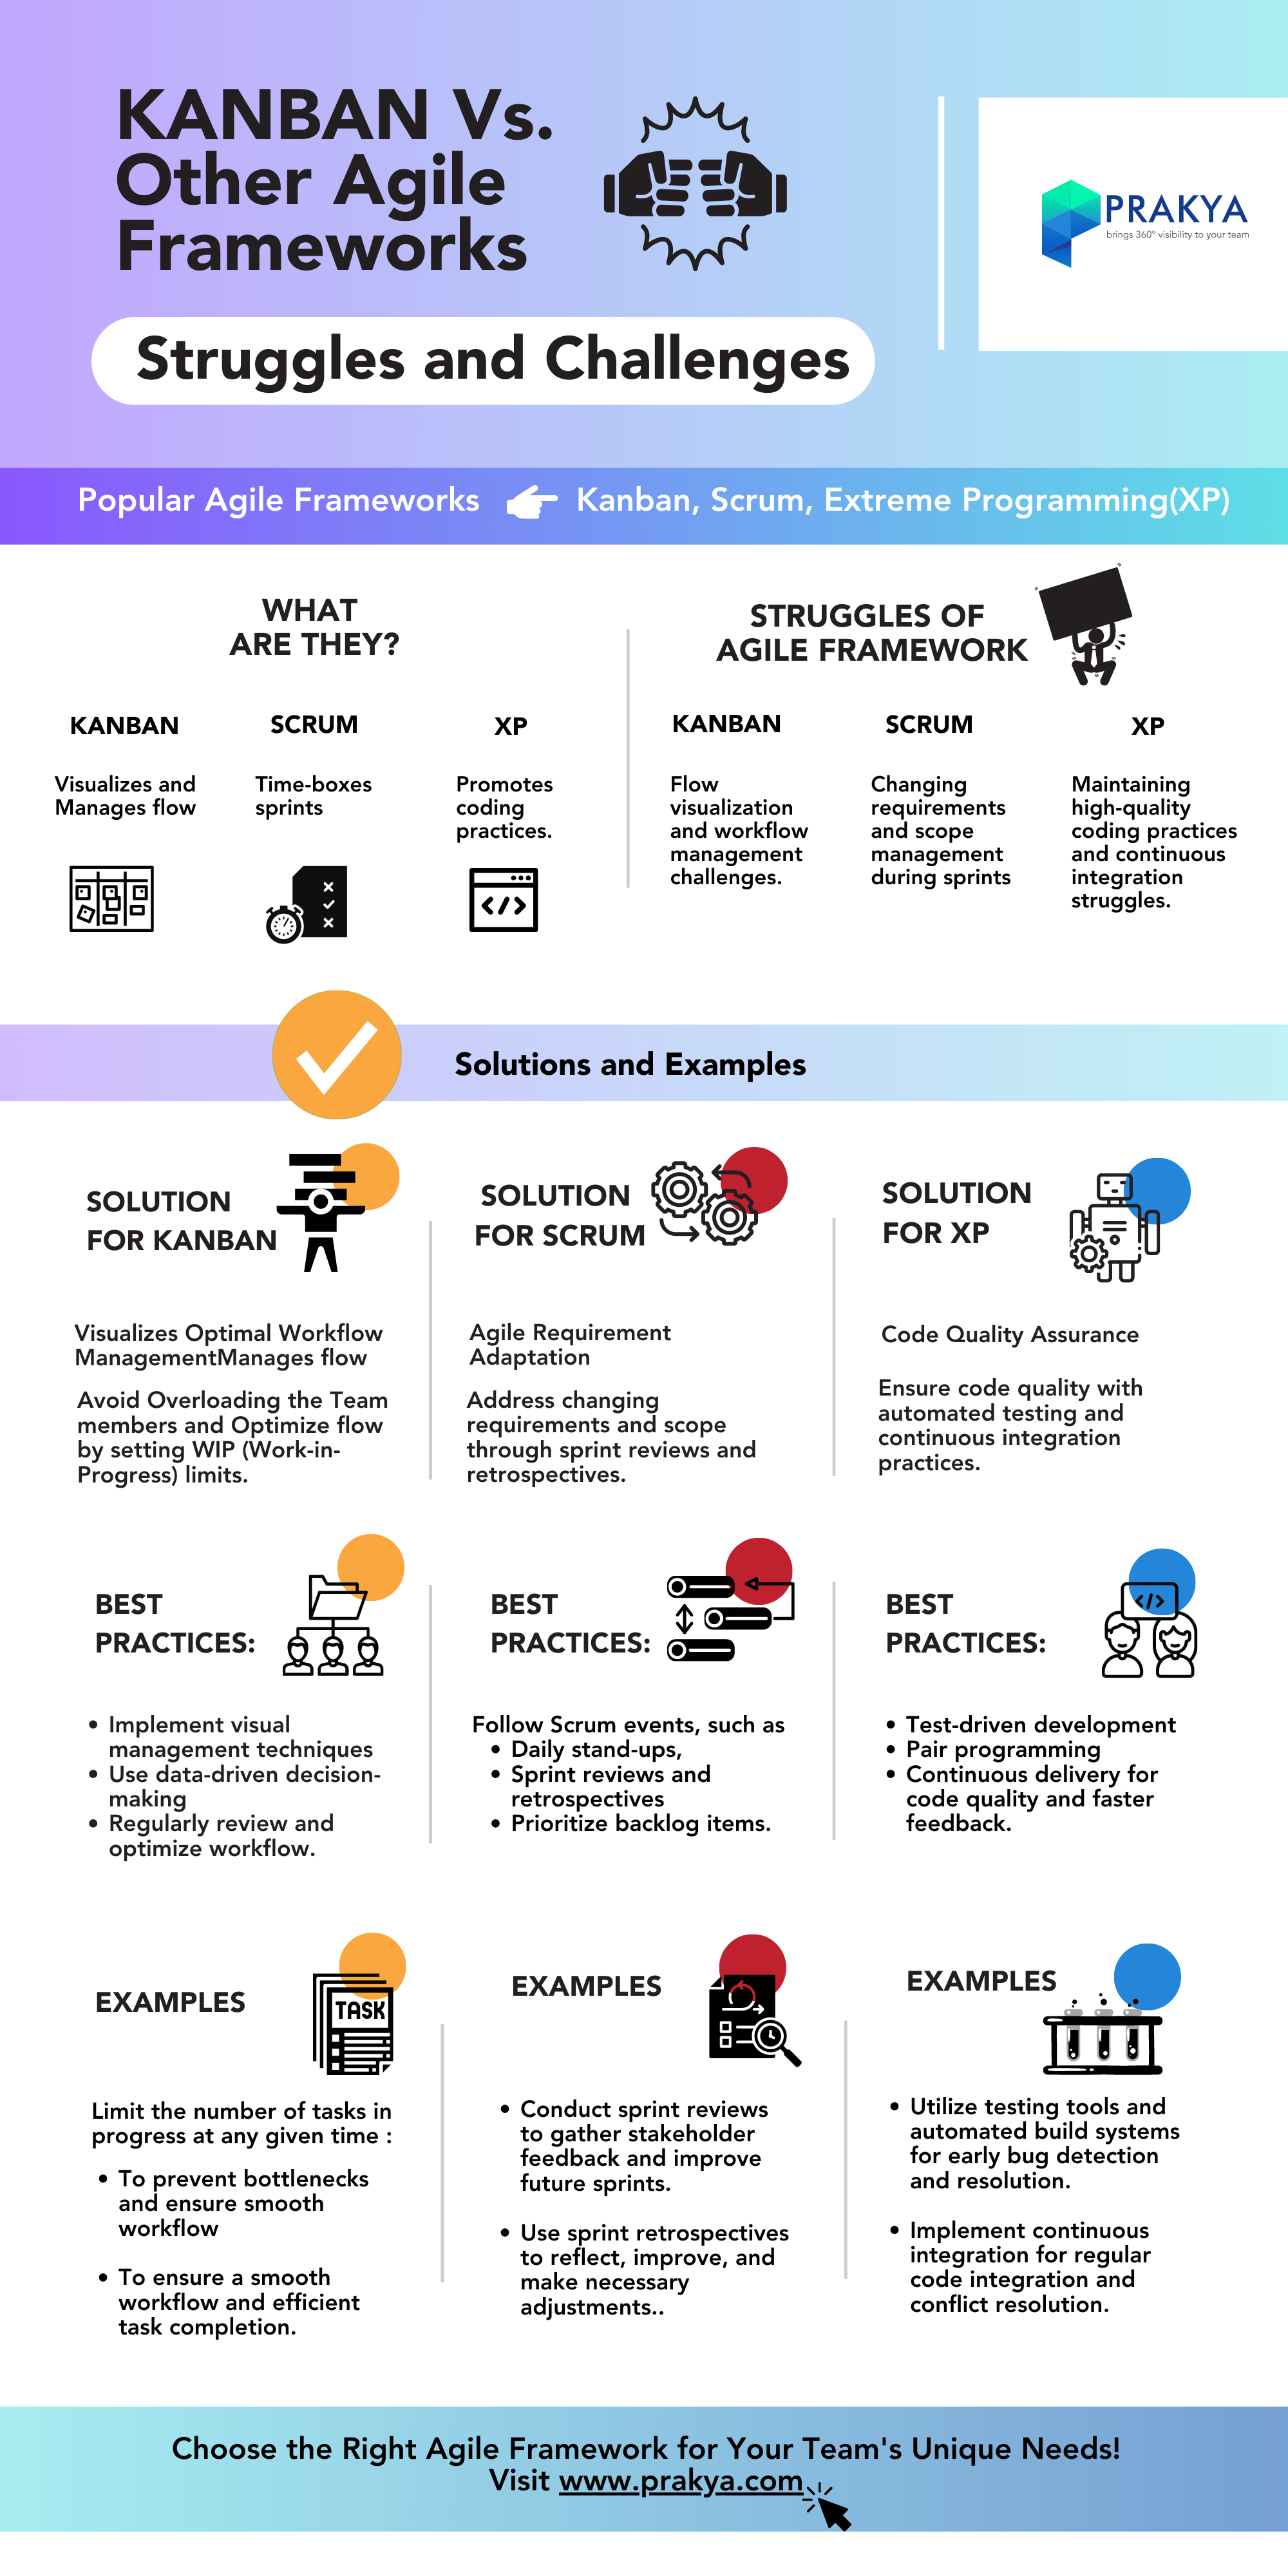 The infographic "KANBAN Vs. Other Agile Frameworks" developed by Prakya compares popular Agile Frameworks such as Kanban, Scrum, and Extreme Programming (XP) in terms of their struggles and solutions. The comparison chart highlights the key features and challenges of each framework and offers practical solutions and best practices. The infographic provides useful examples and tips for optimal workflow management, agile requirement adaptation, and code quality assurance. The overall message is to choose the right Agile Framework that best suits your team's unique needs.